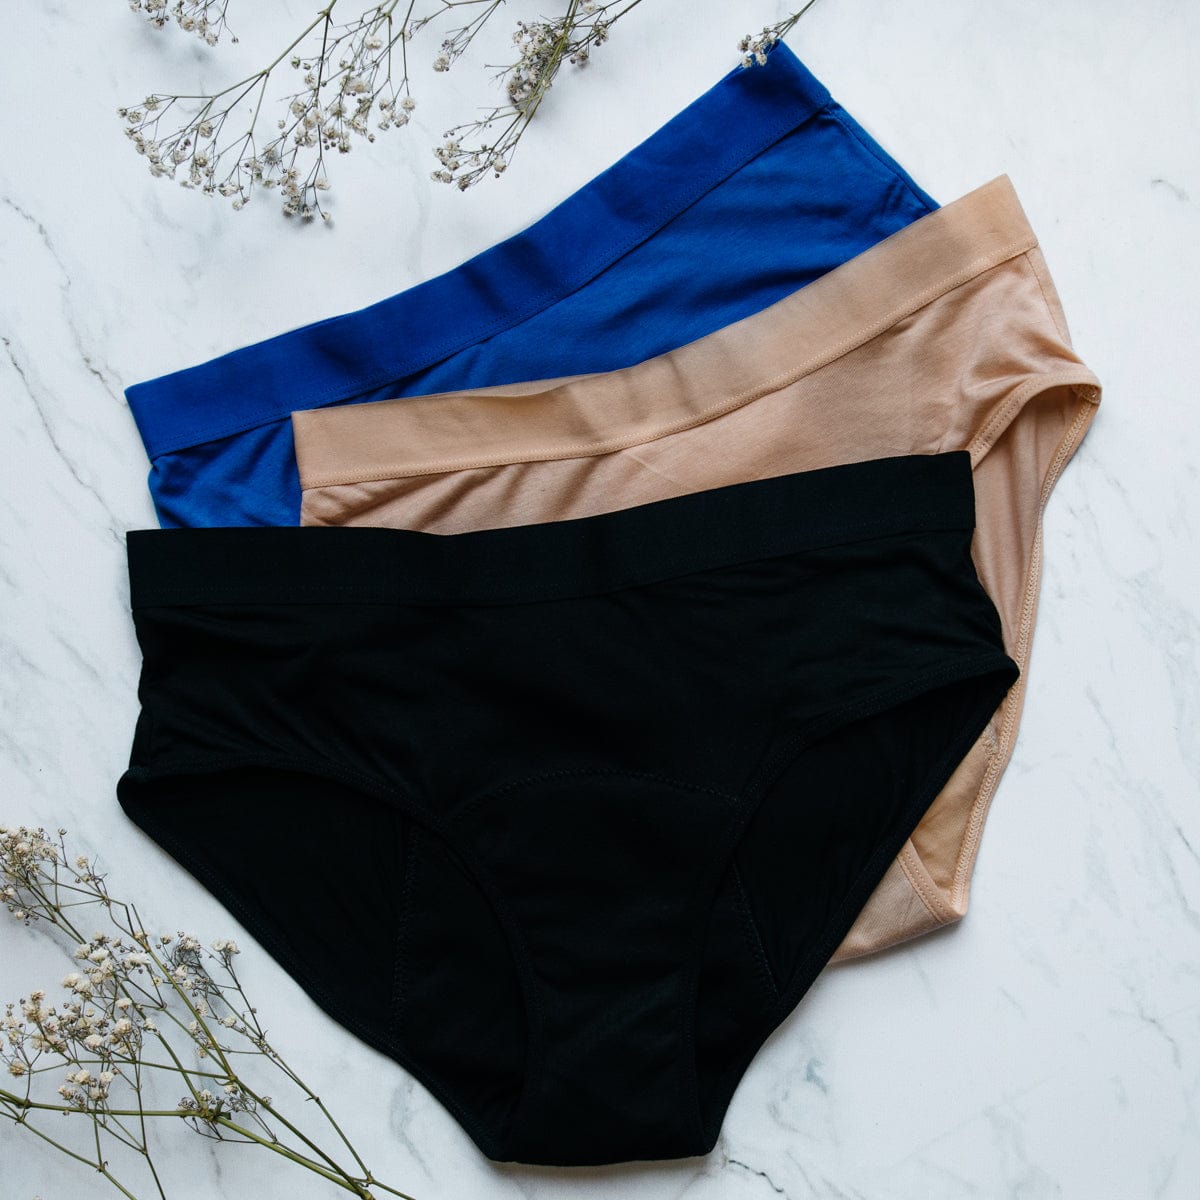 EnaBela Women's Bamboo Period Panties | Made of Earth-Friendly Bamboo  Fibre| No Tampons, Pads, Liners, Cups, Required